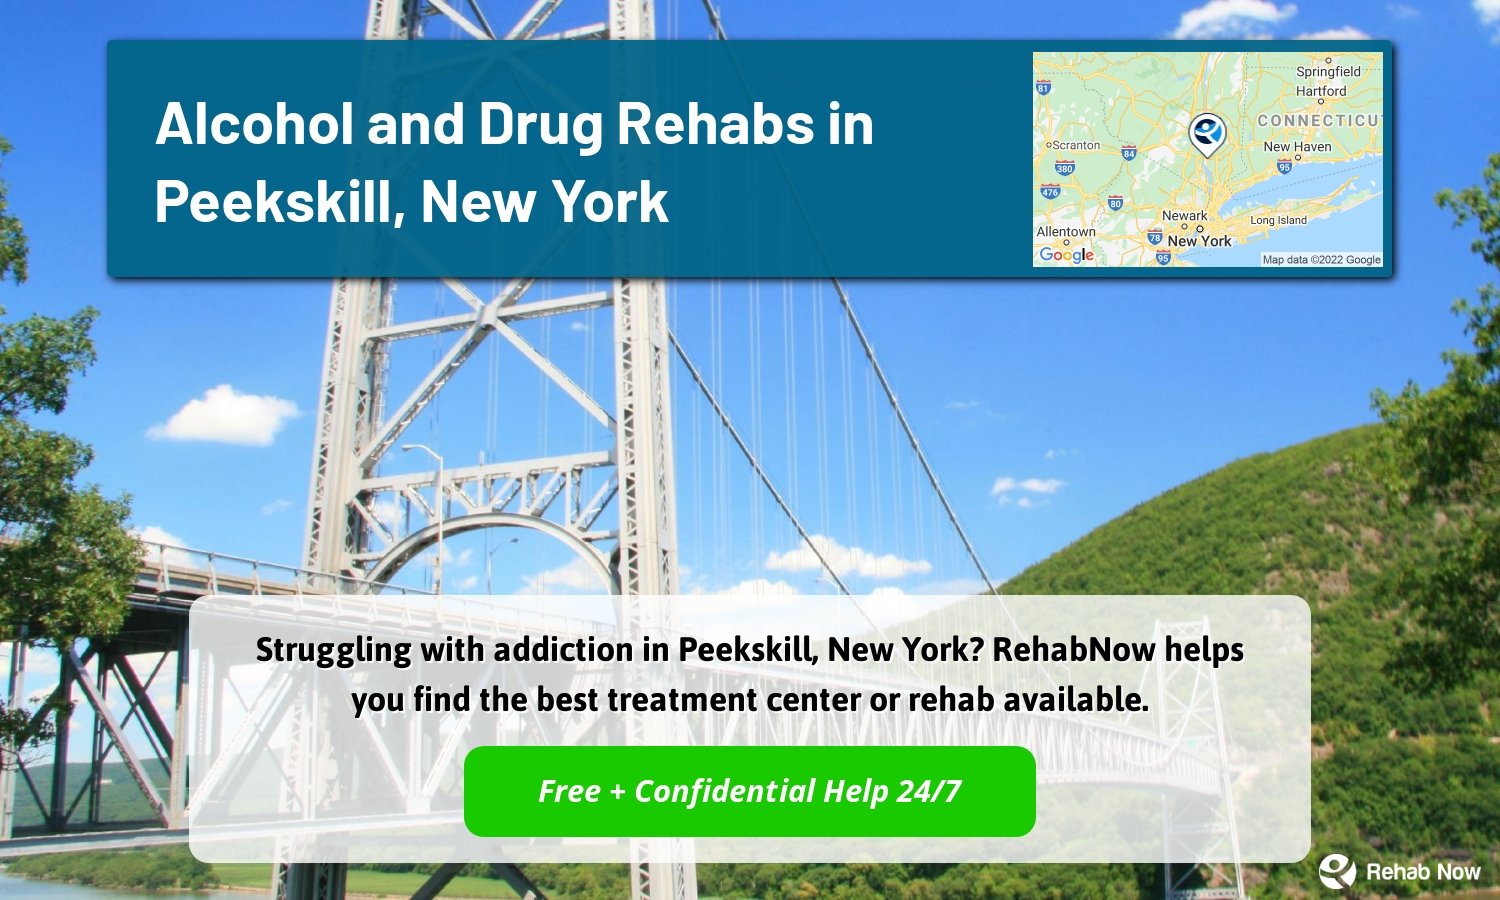 Struggling with addiction in Peekskill, New York? RehabNow helps you find the best treatment center or rehab available.